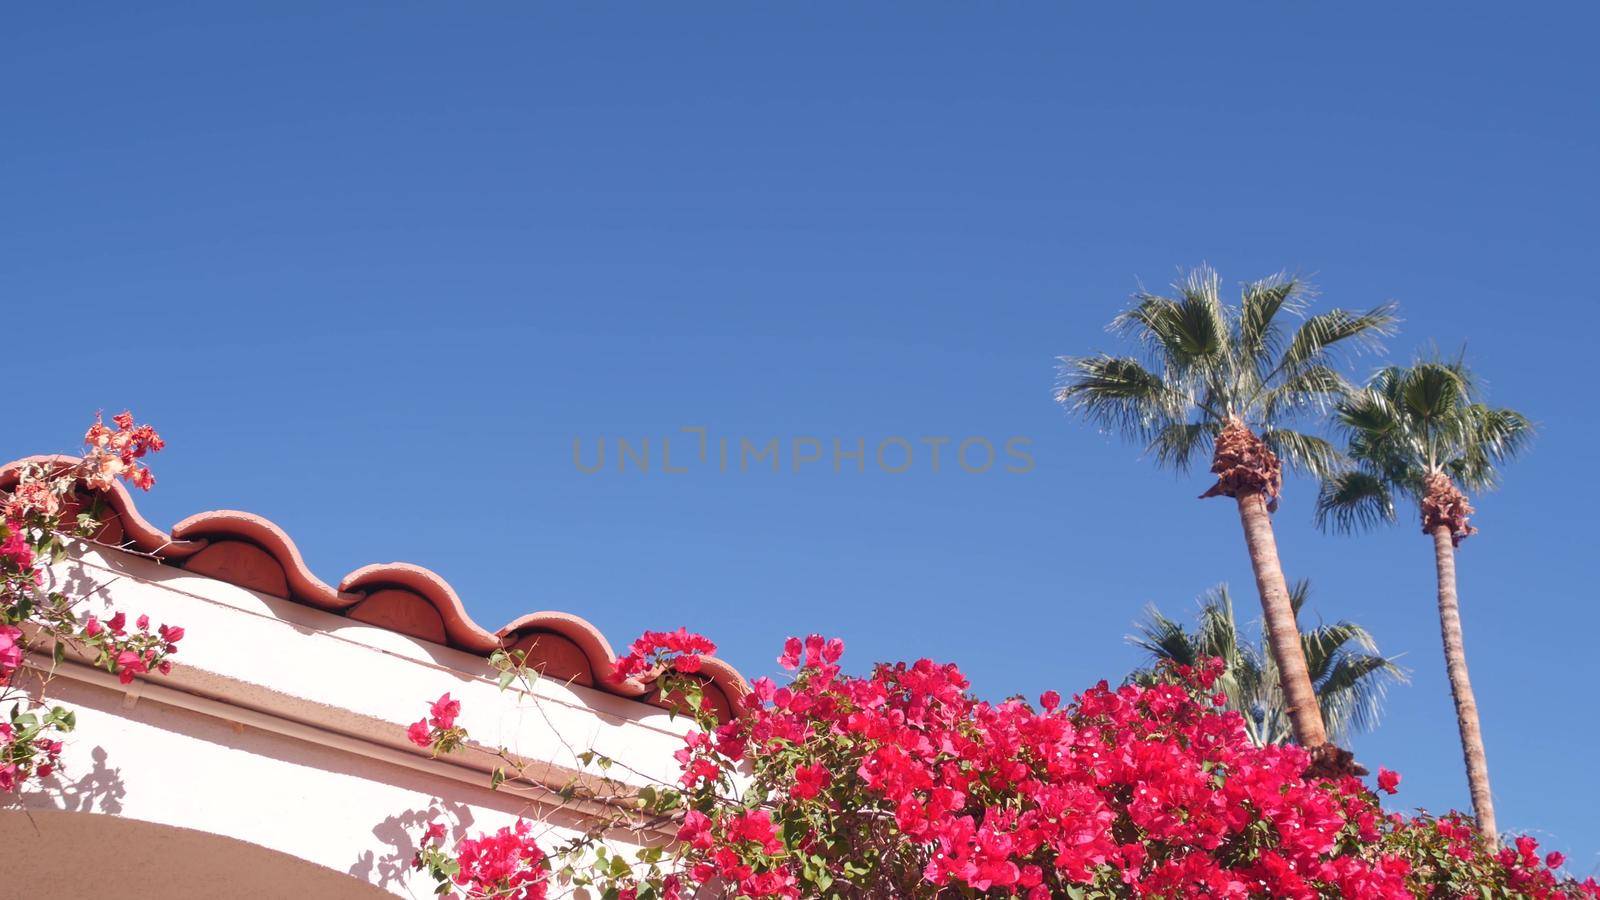 Bougainvillea flowers blossom or bloom. Mexican garden, California palm trees. by DogoraSun